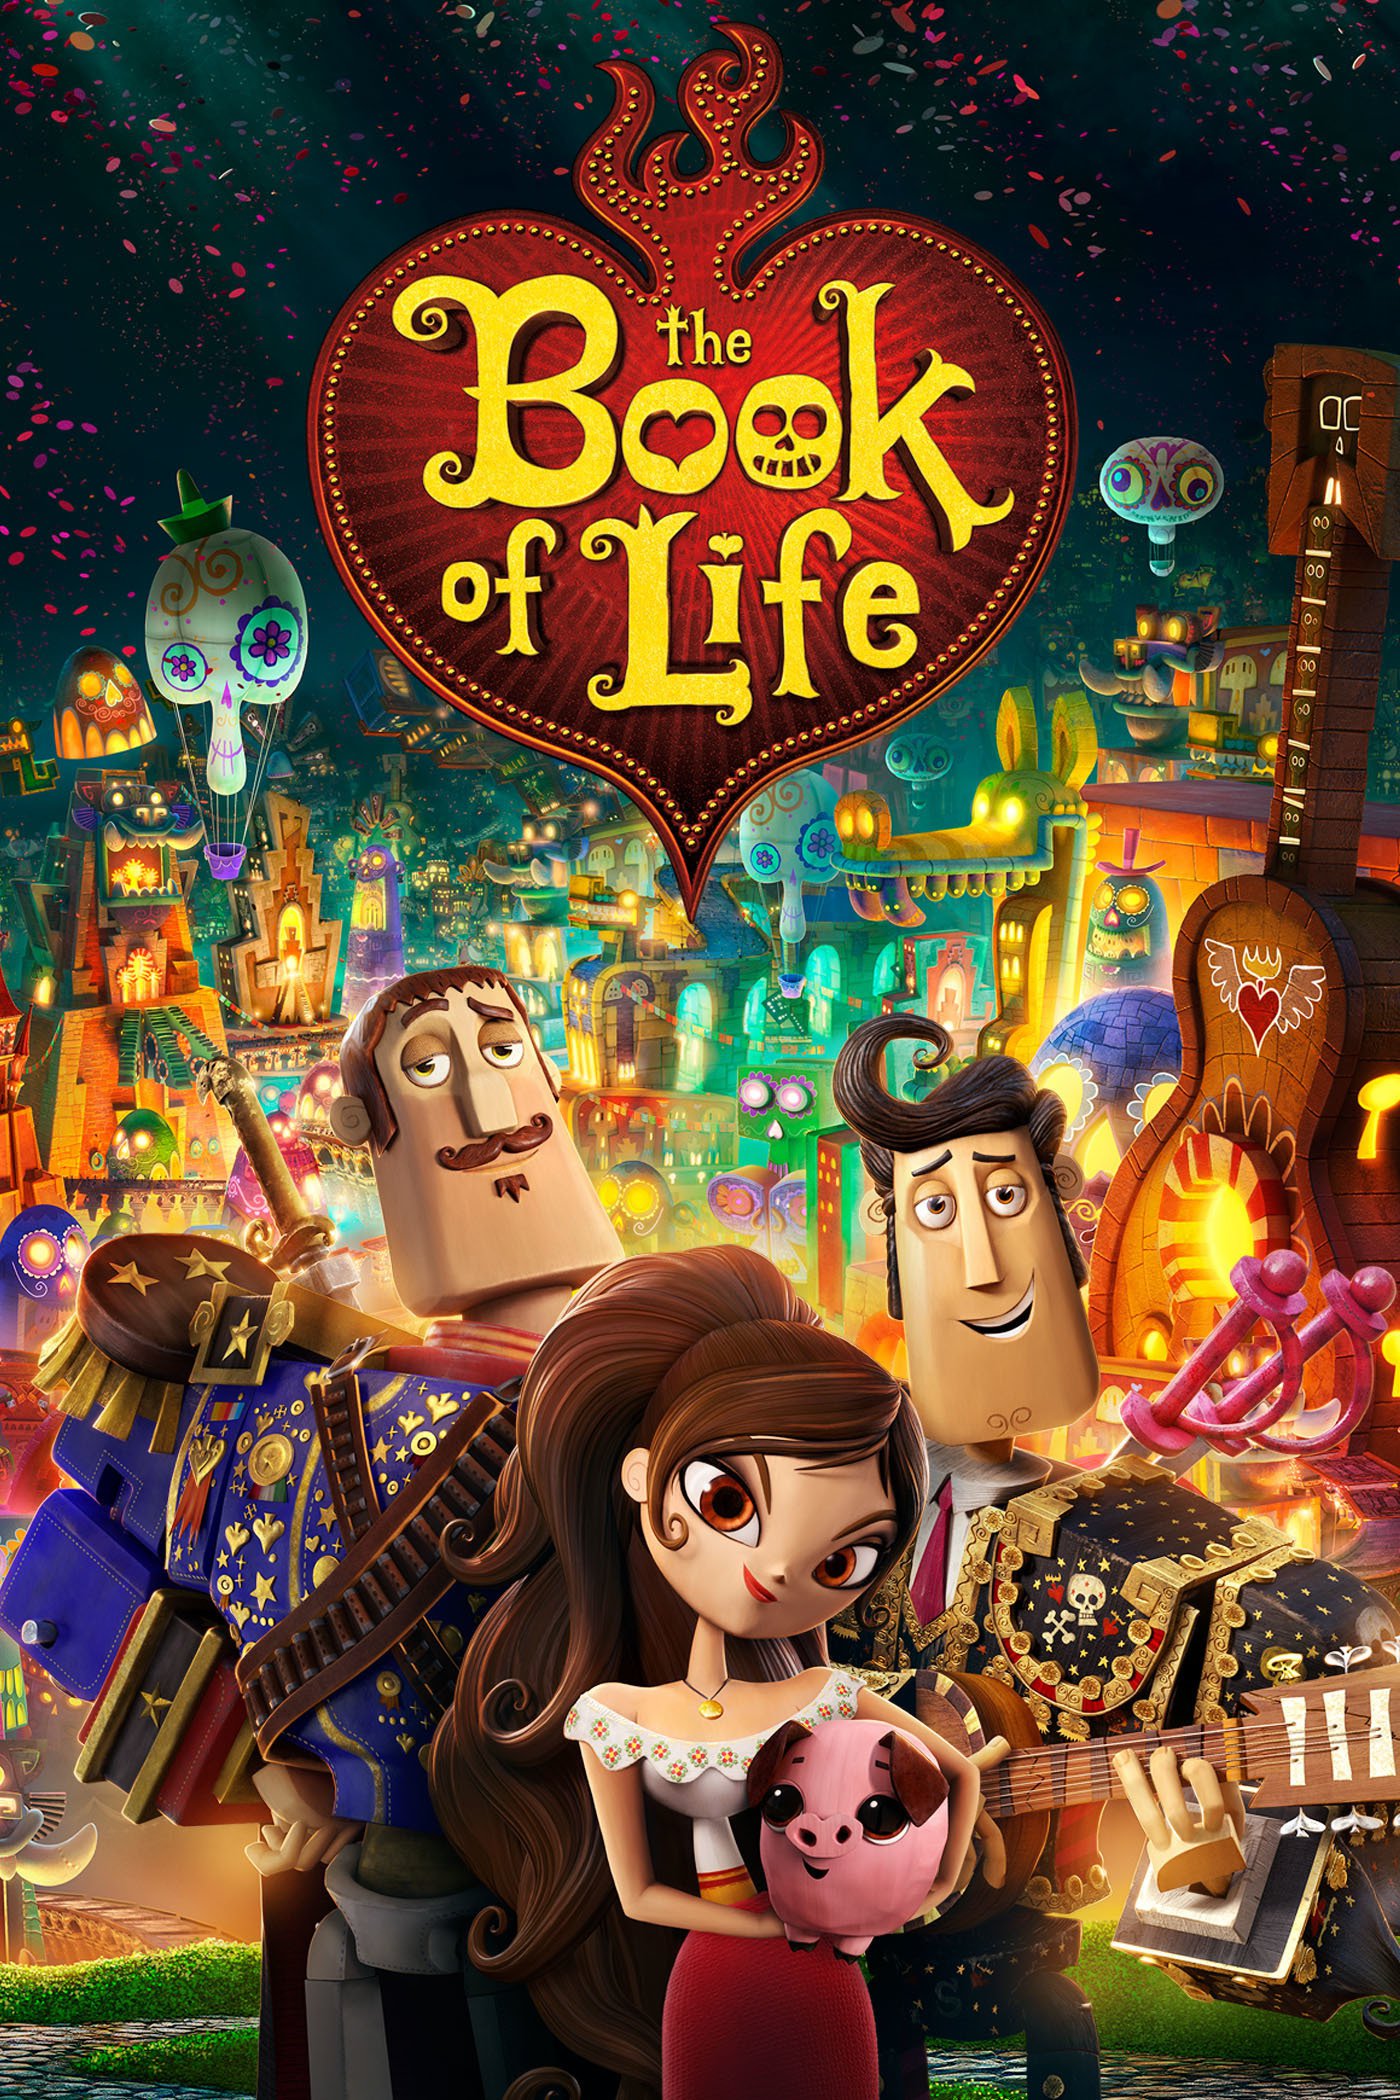 Poster for the movie "The Book of Life"